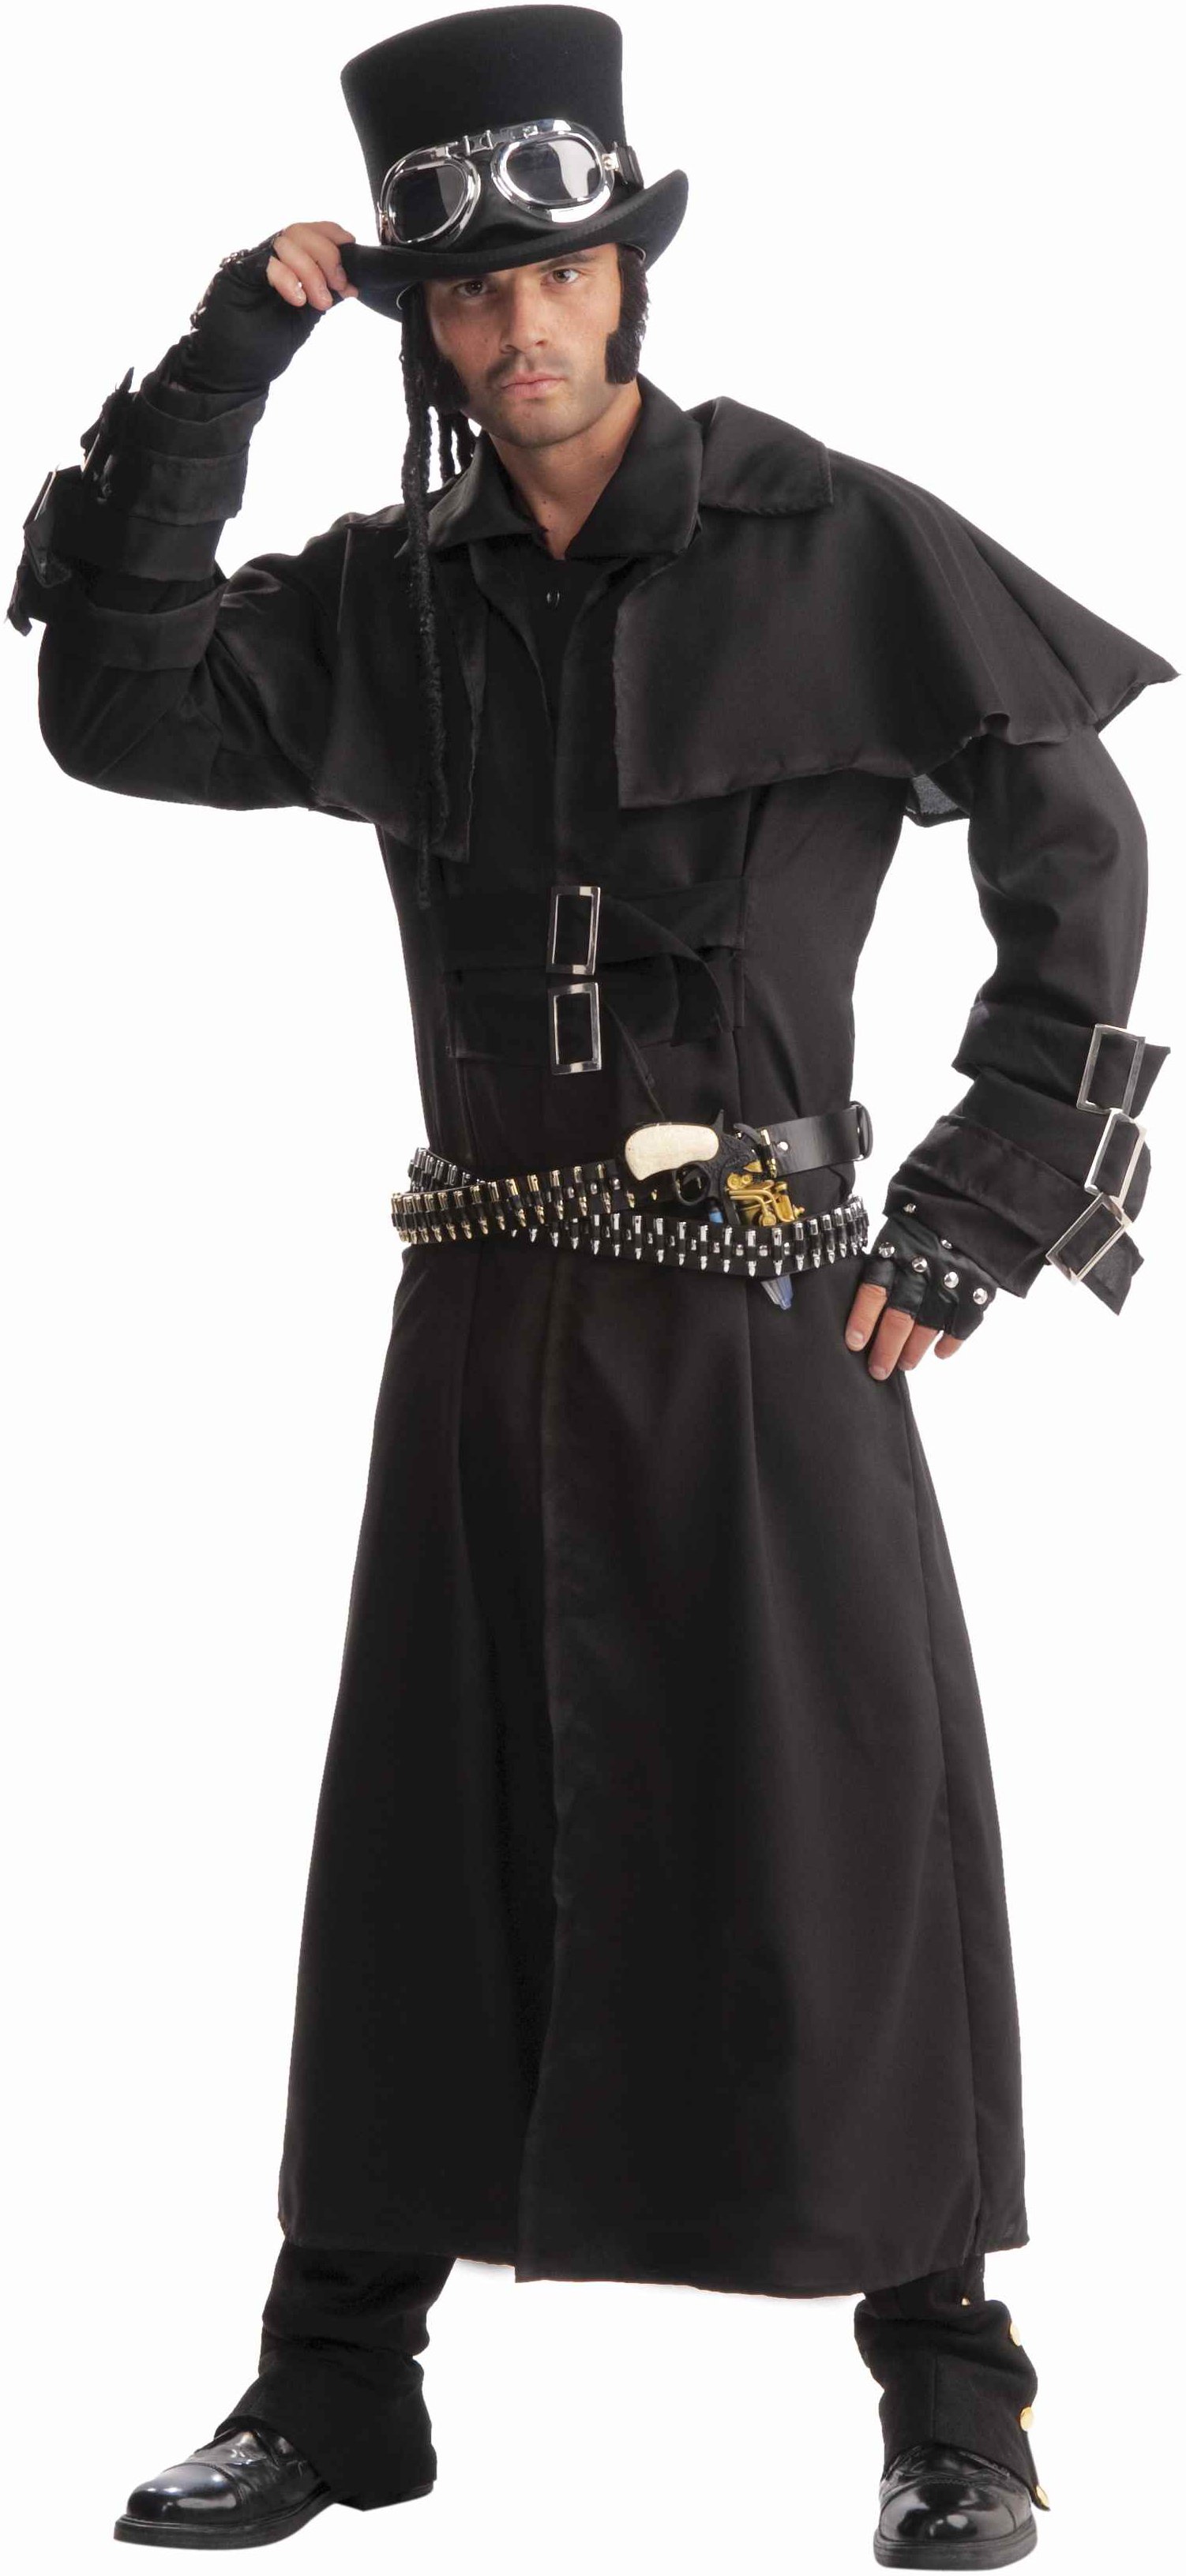 Steampunk Duster Adult Costume